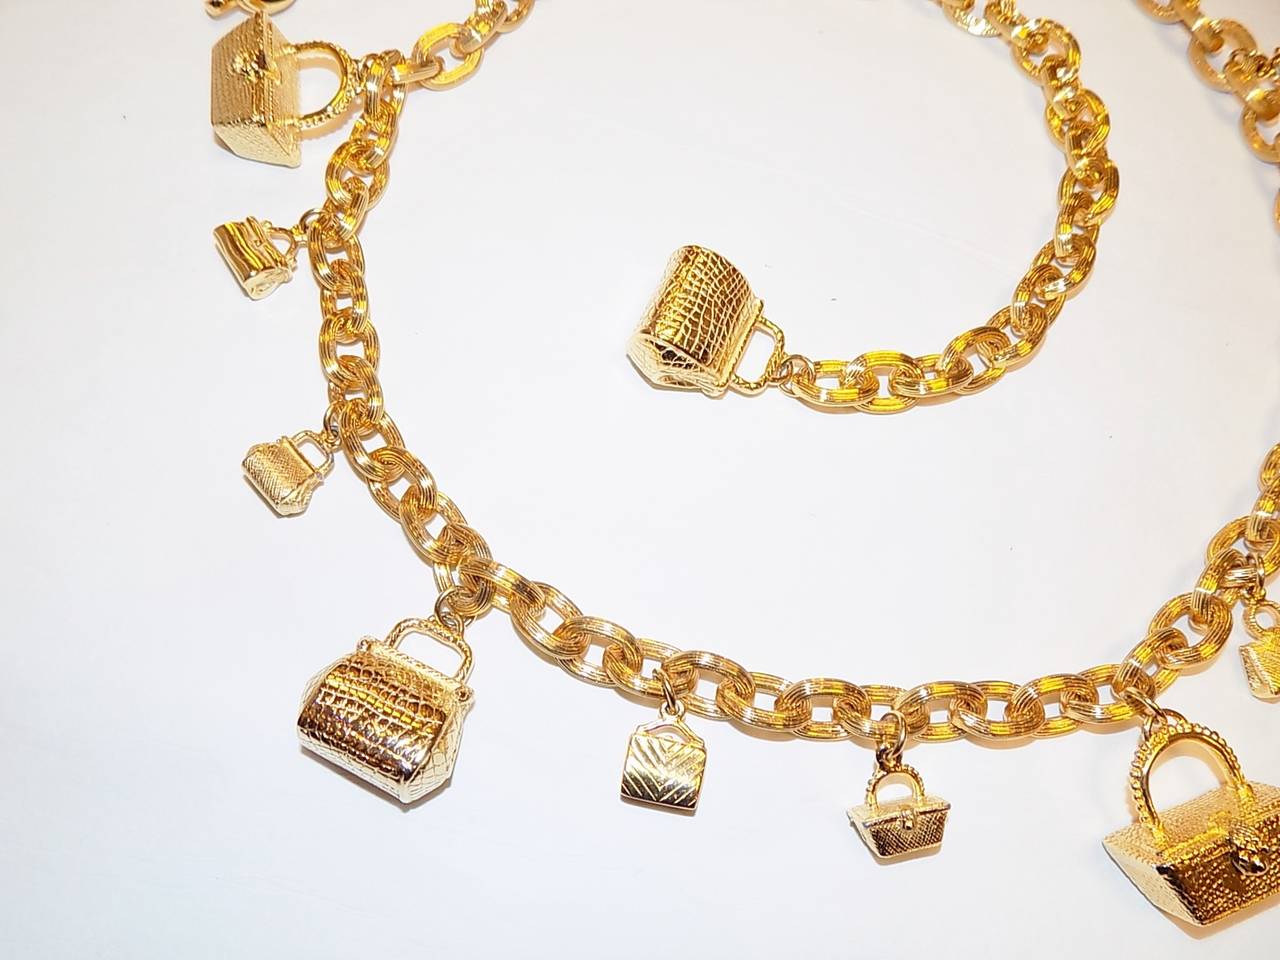 Spectacular vintage Judith Leiber  Miniadeure Bags   Charms Belt  . Gold tone chain with hanging small bags in different design. Some of them look like crystal bags and some like exotic skin bags but all represent distinguished Judith Leiber